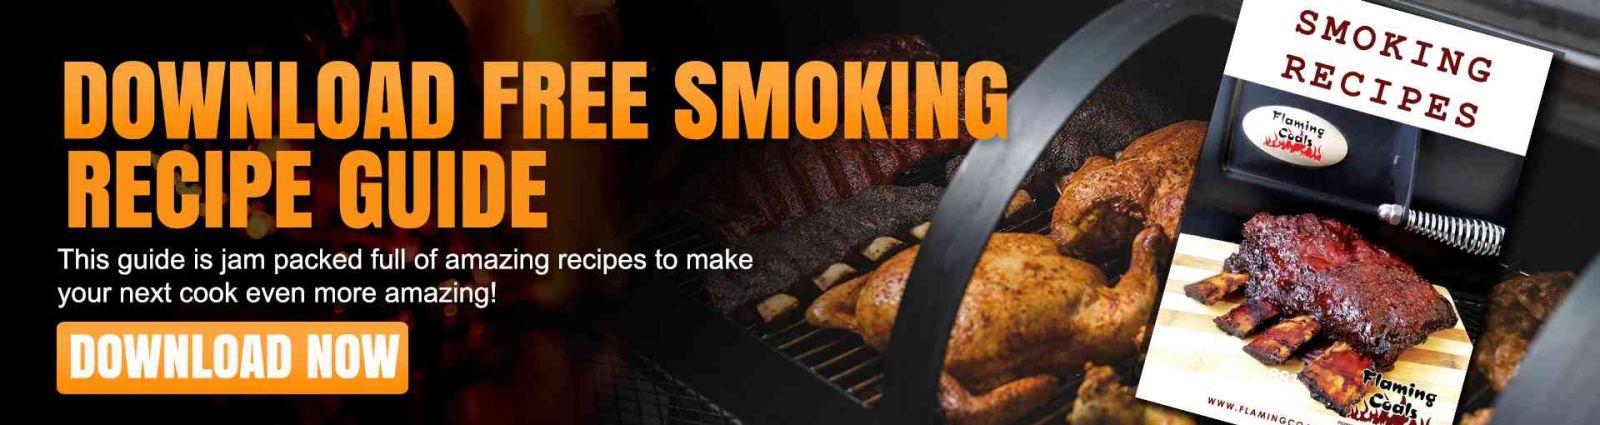 This is a banner that links to a smokers recipe book available for download